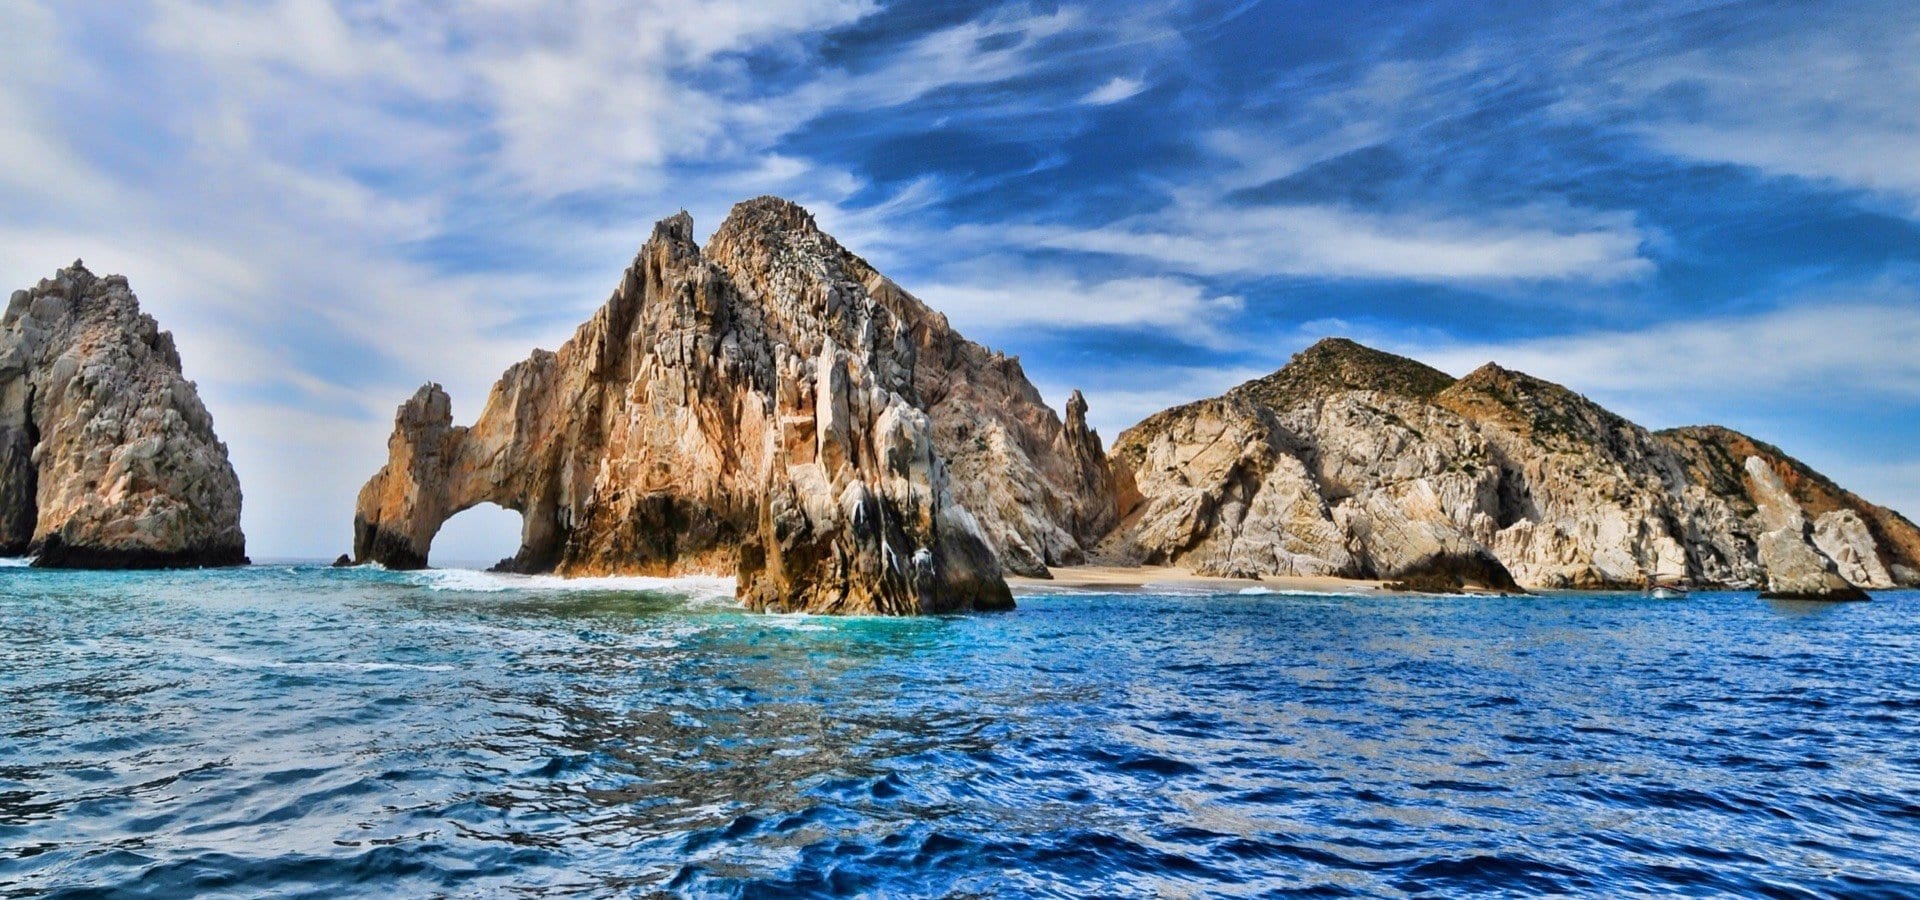 Is it safe to travel to Los Cabos?